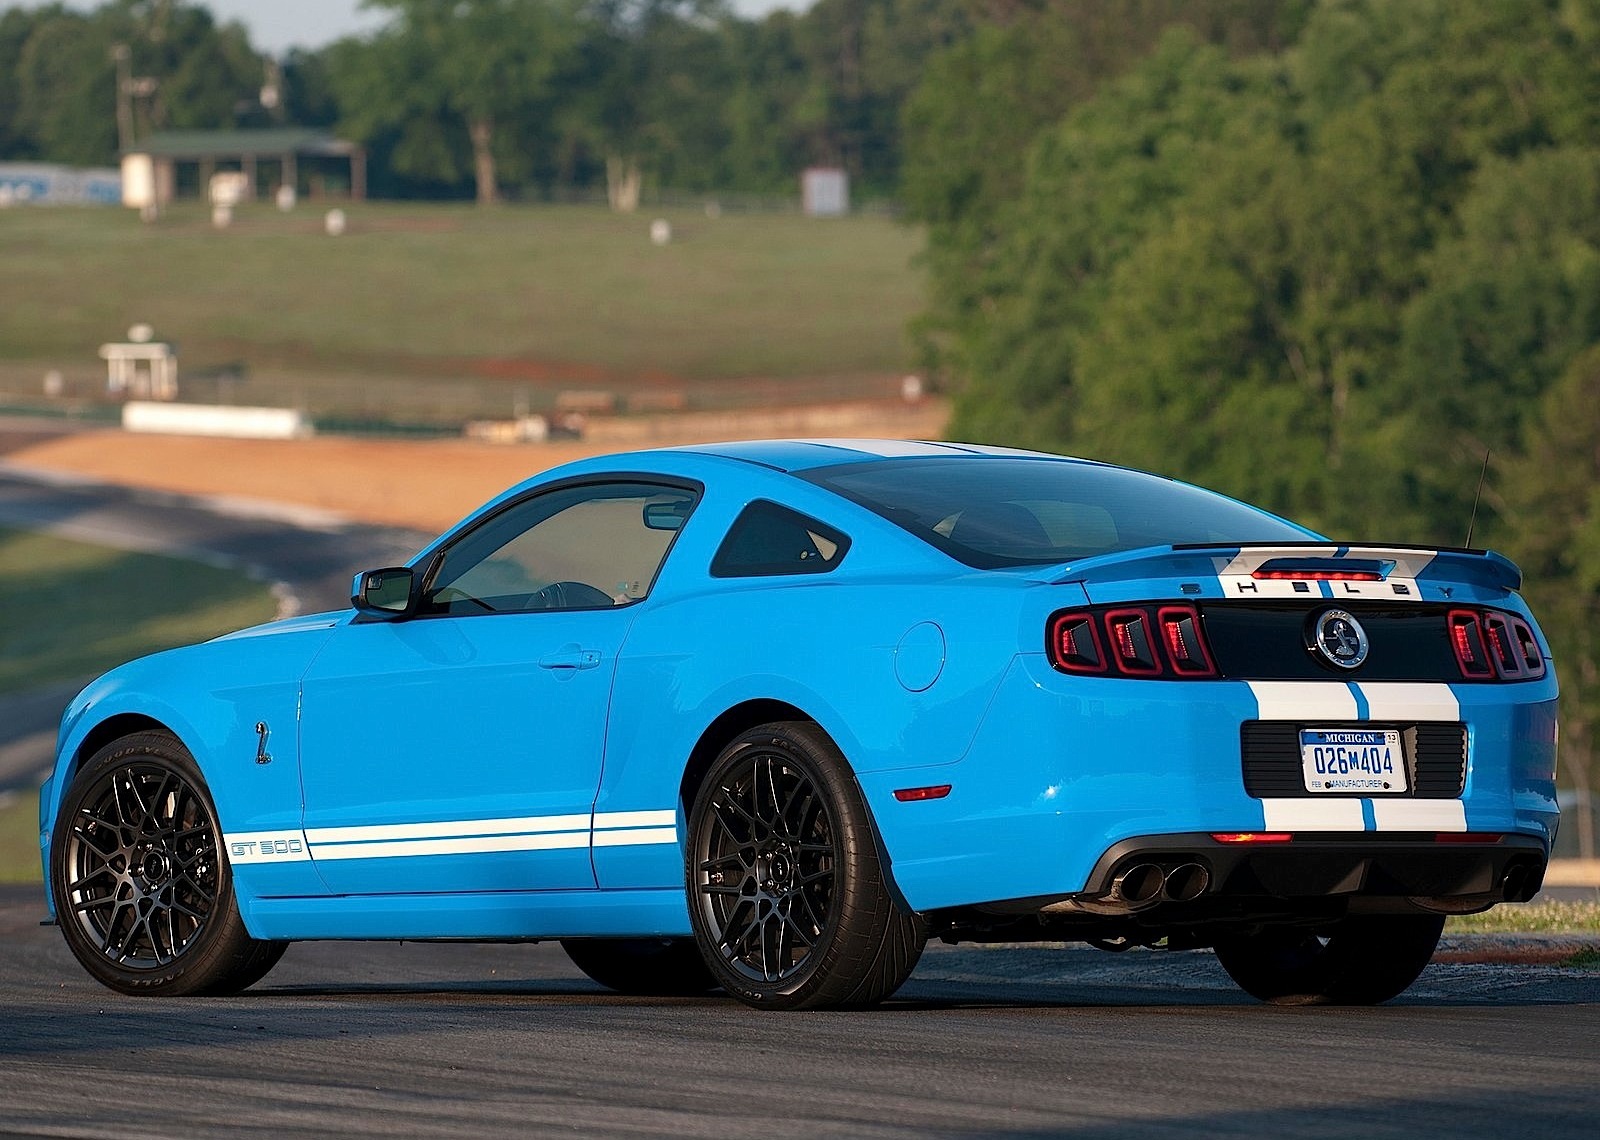 Ford Shelby gt500 2013